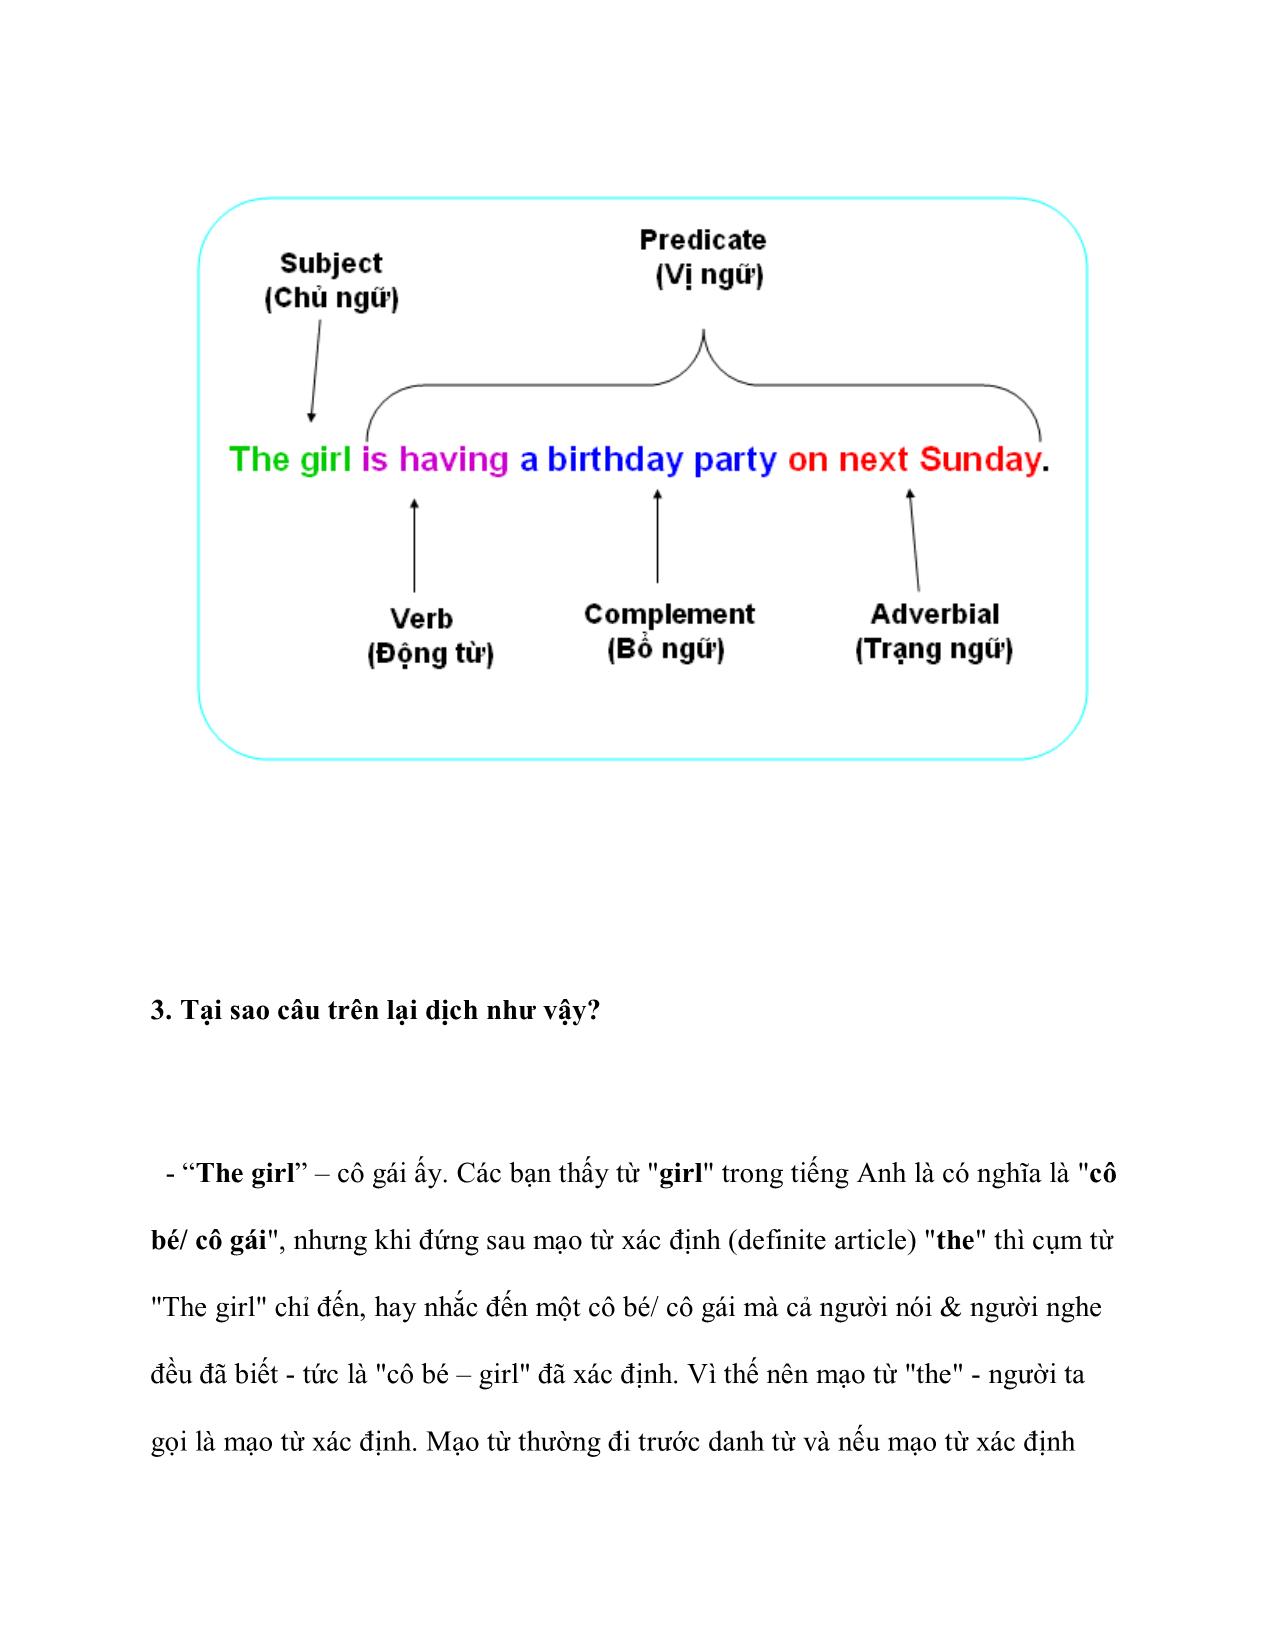 The girl is having a birthday party on next Sunday trang 4